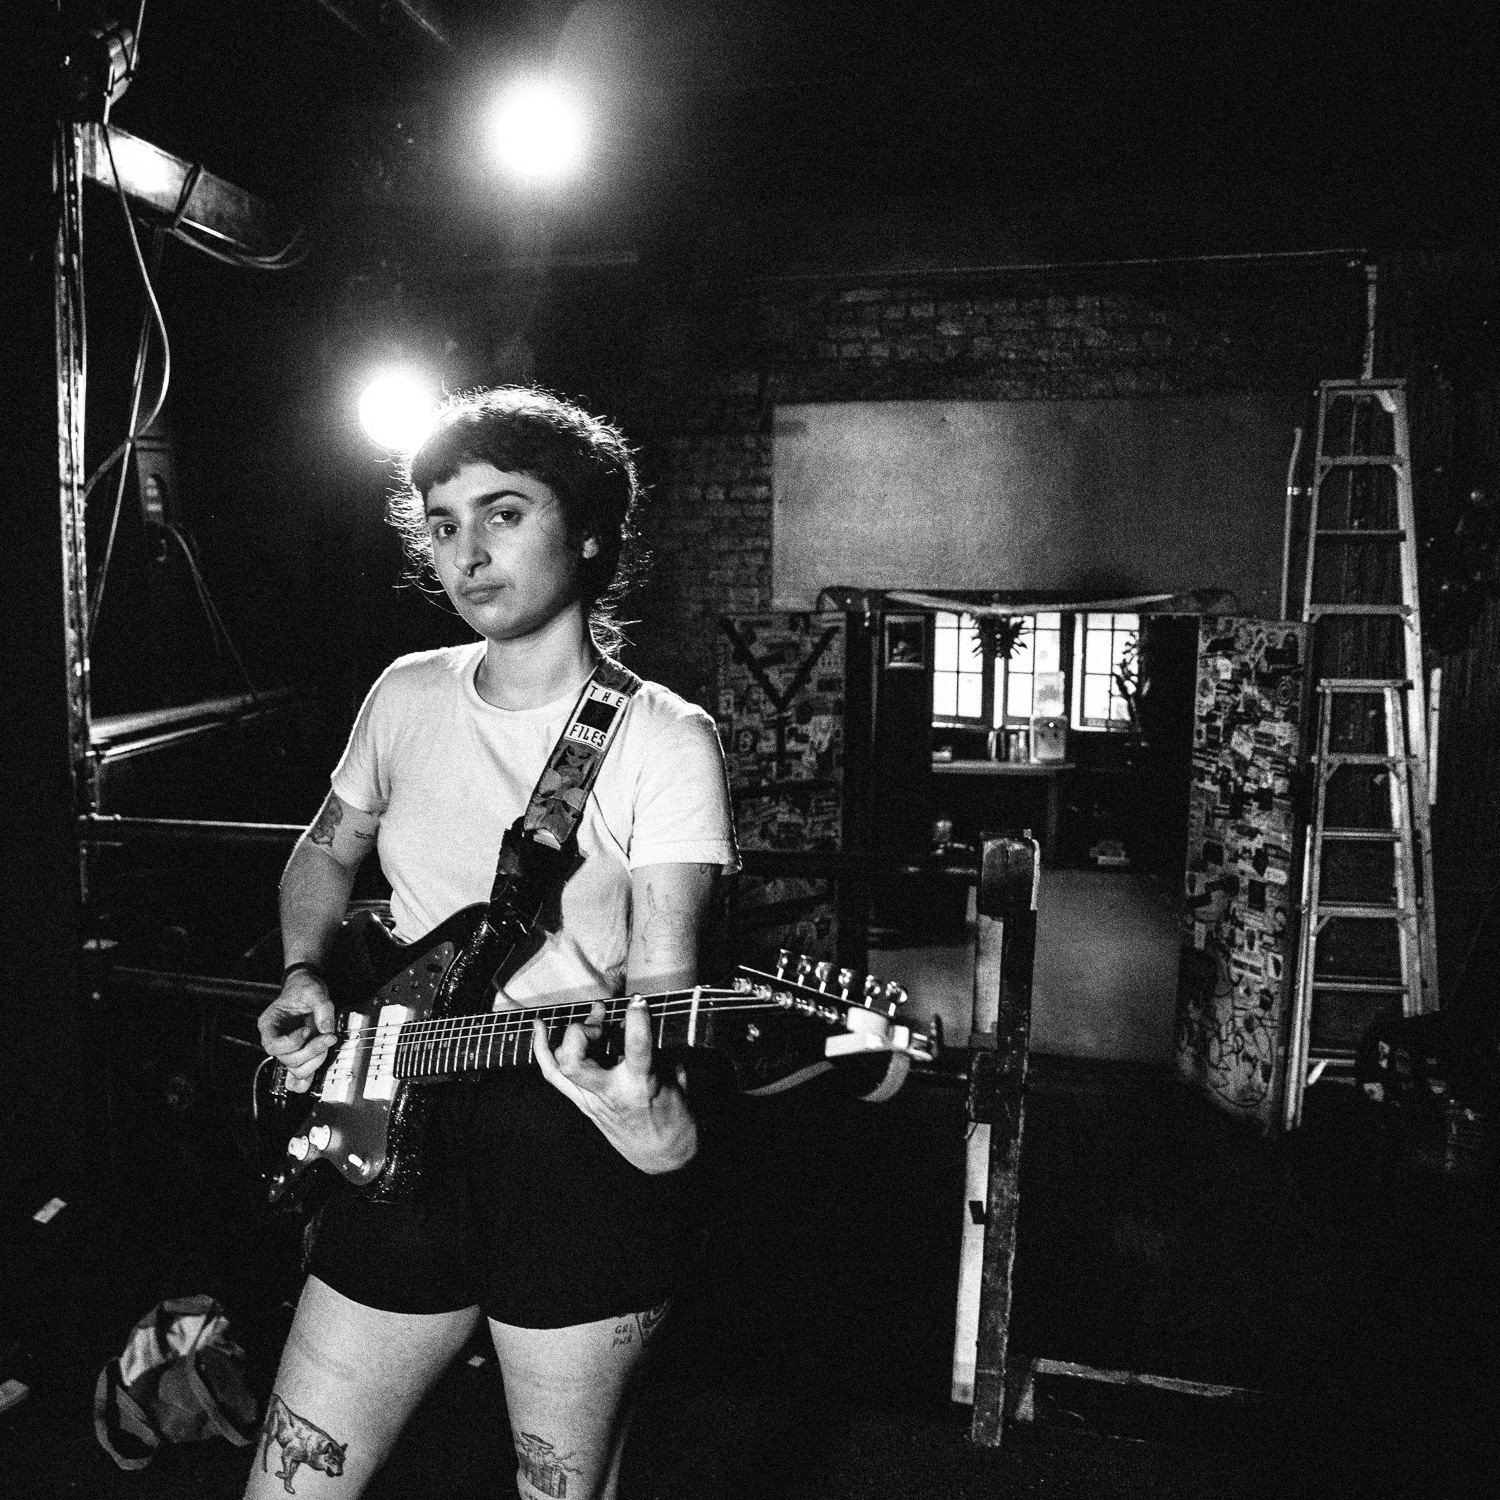 Camp Cope Tour with Worriers by Matt Walter